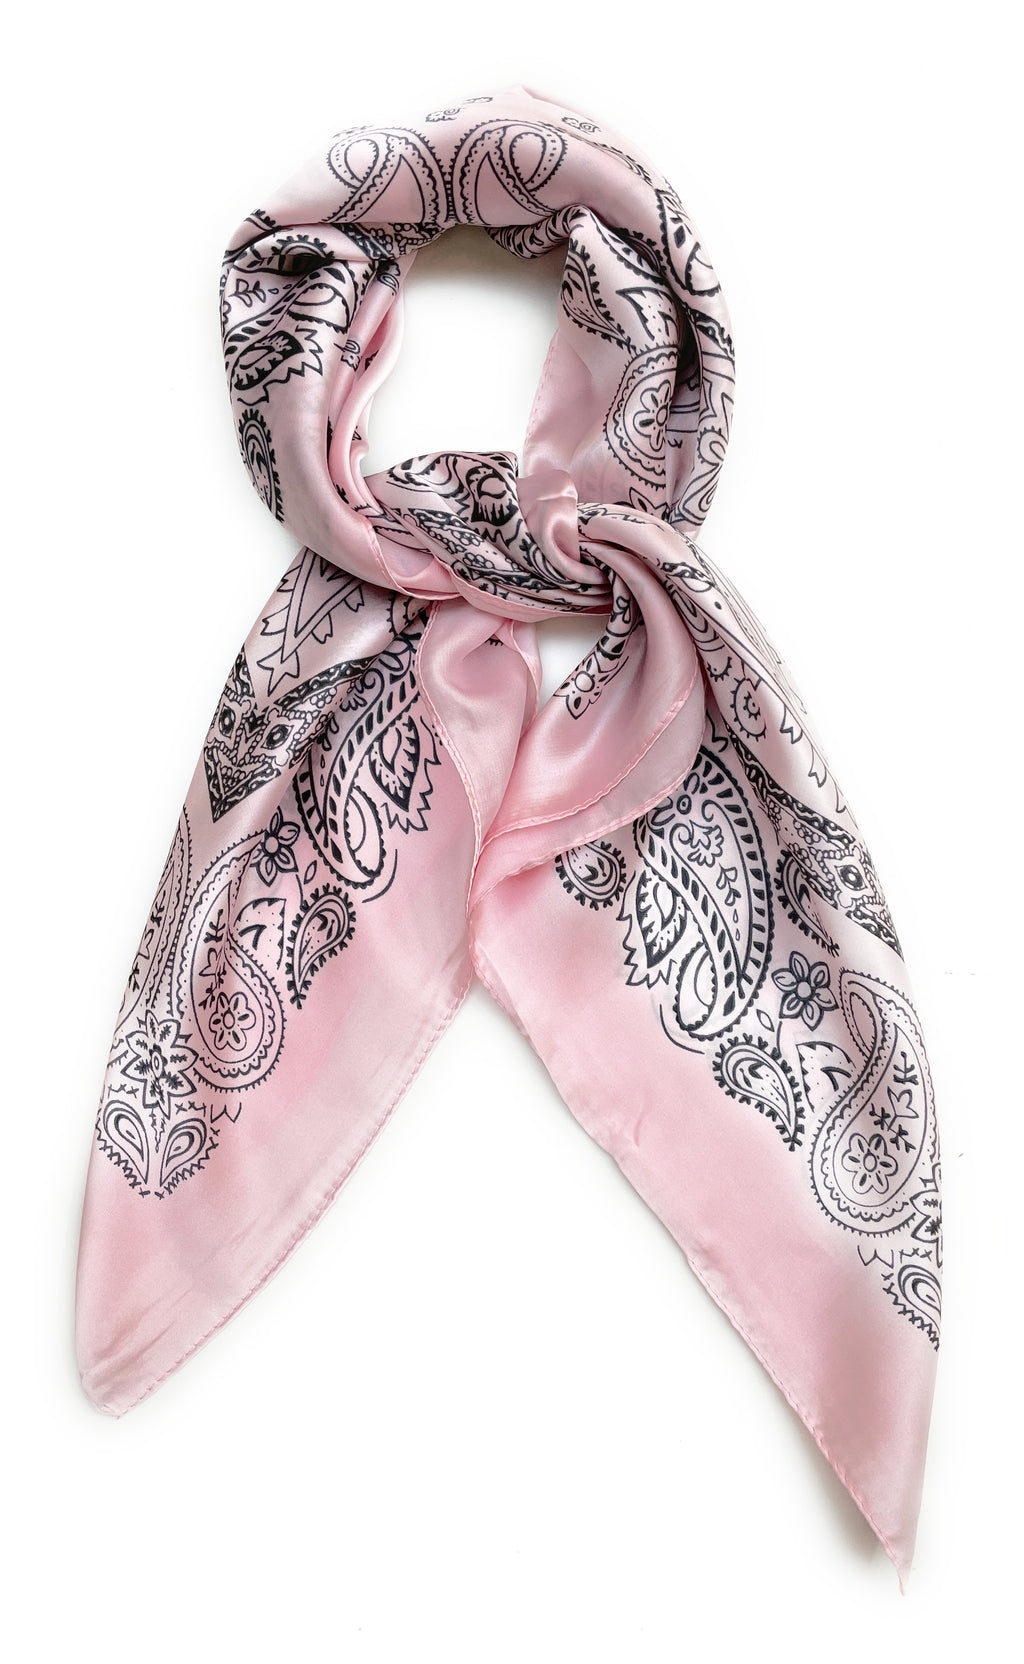 70cm x 70cm Square Scarf Pink Paisley Scarf Thin Silky Womens Summer Spring